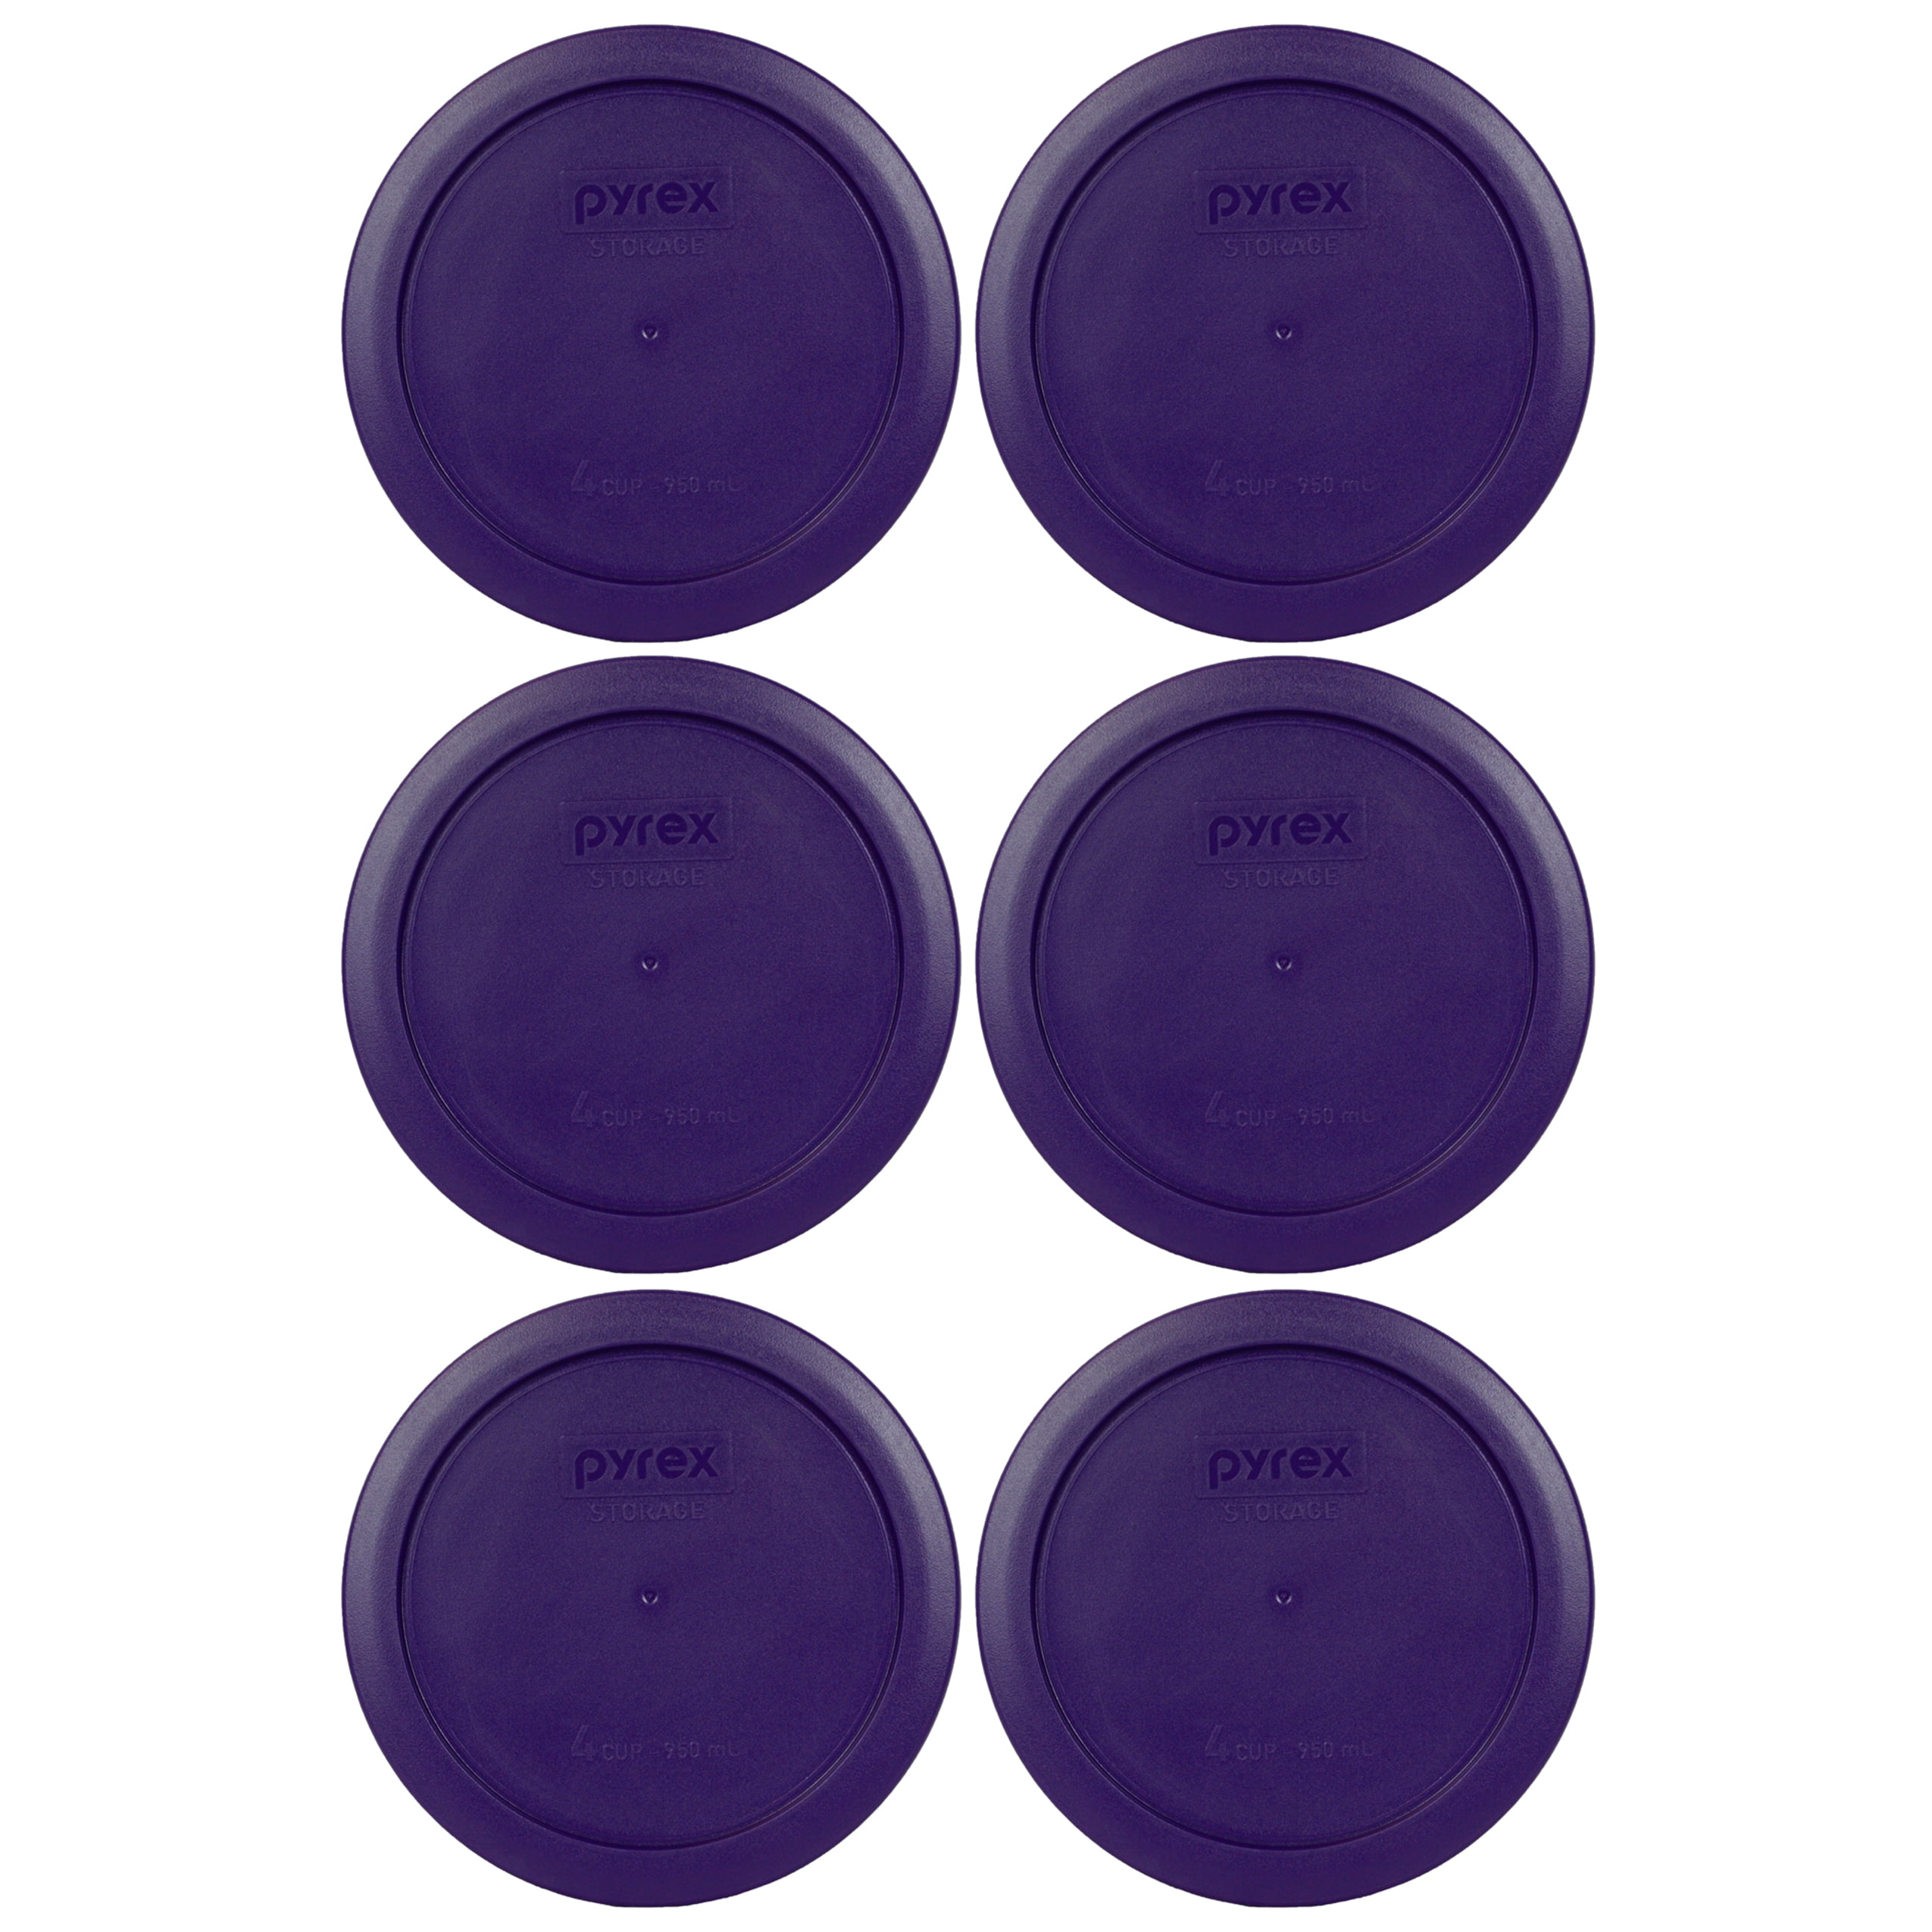 Pyrex 7201-PC 6 4 Cup Lids for Glass Bowl 2-Black, 2-Blue and 2-Red 